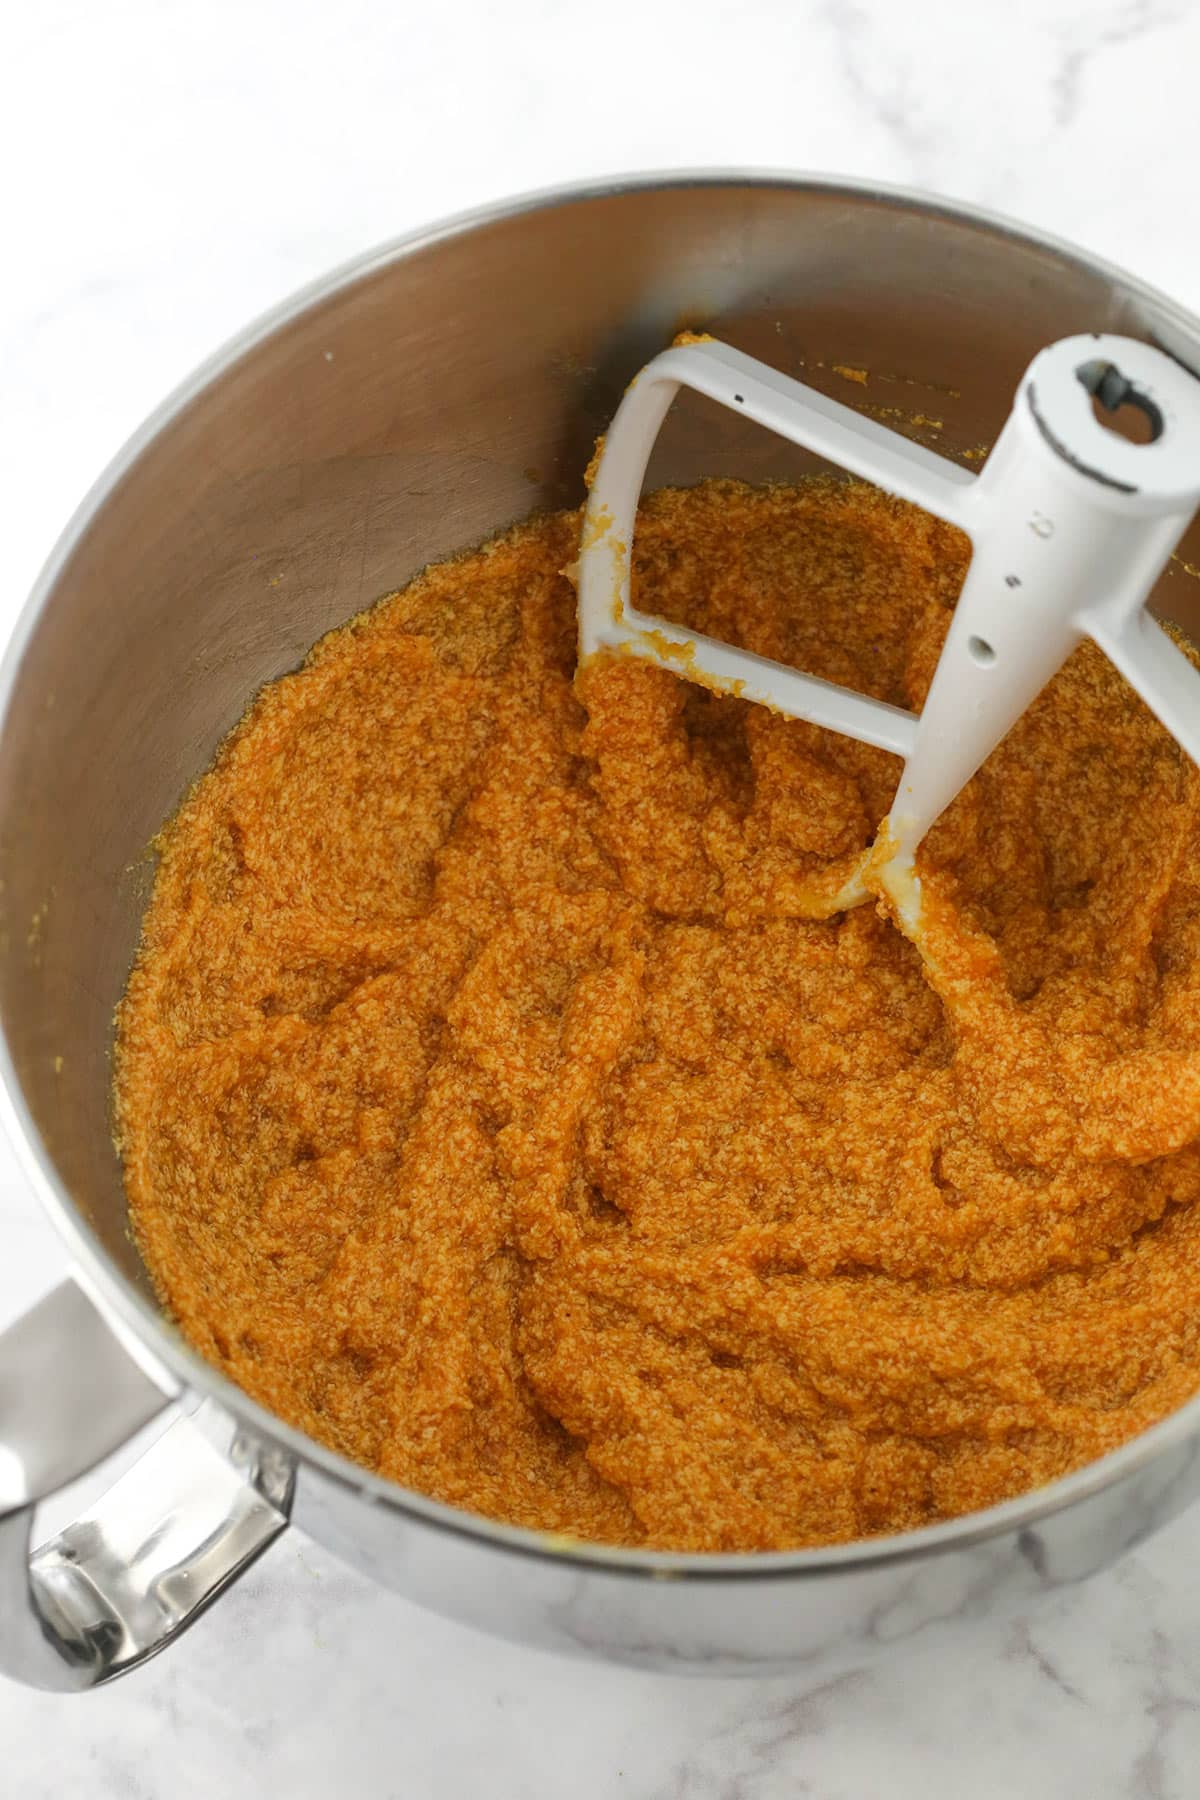 The wet ingredients in a bowl after the pumpkin puree has been added